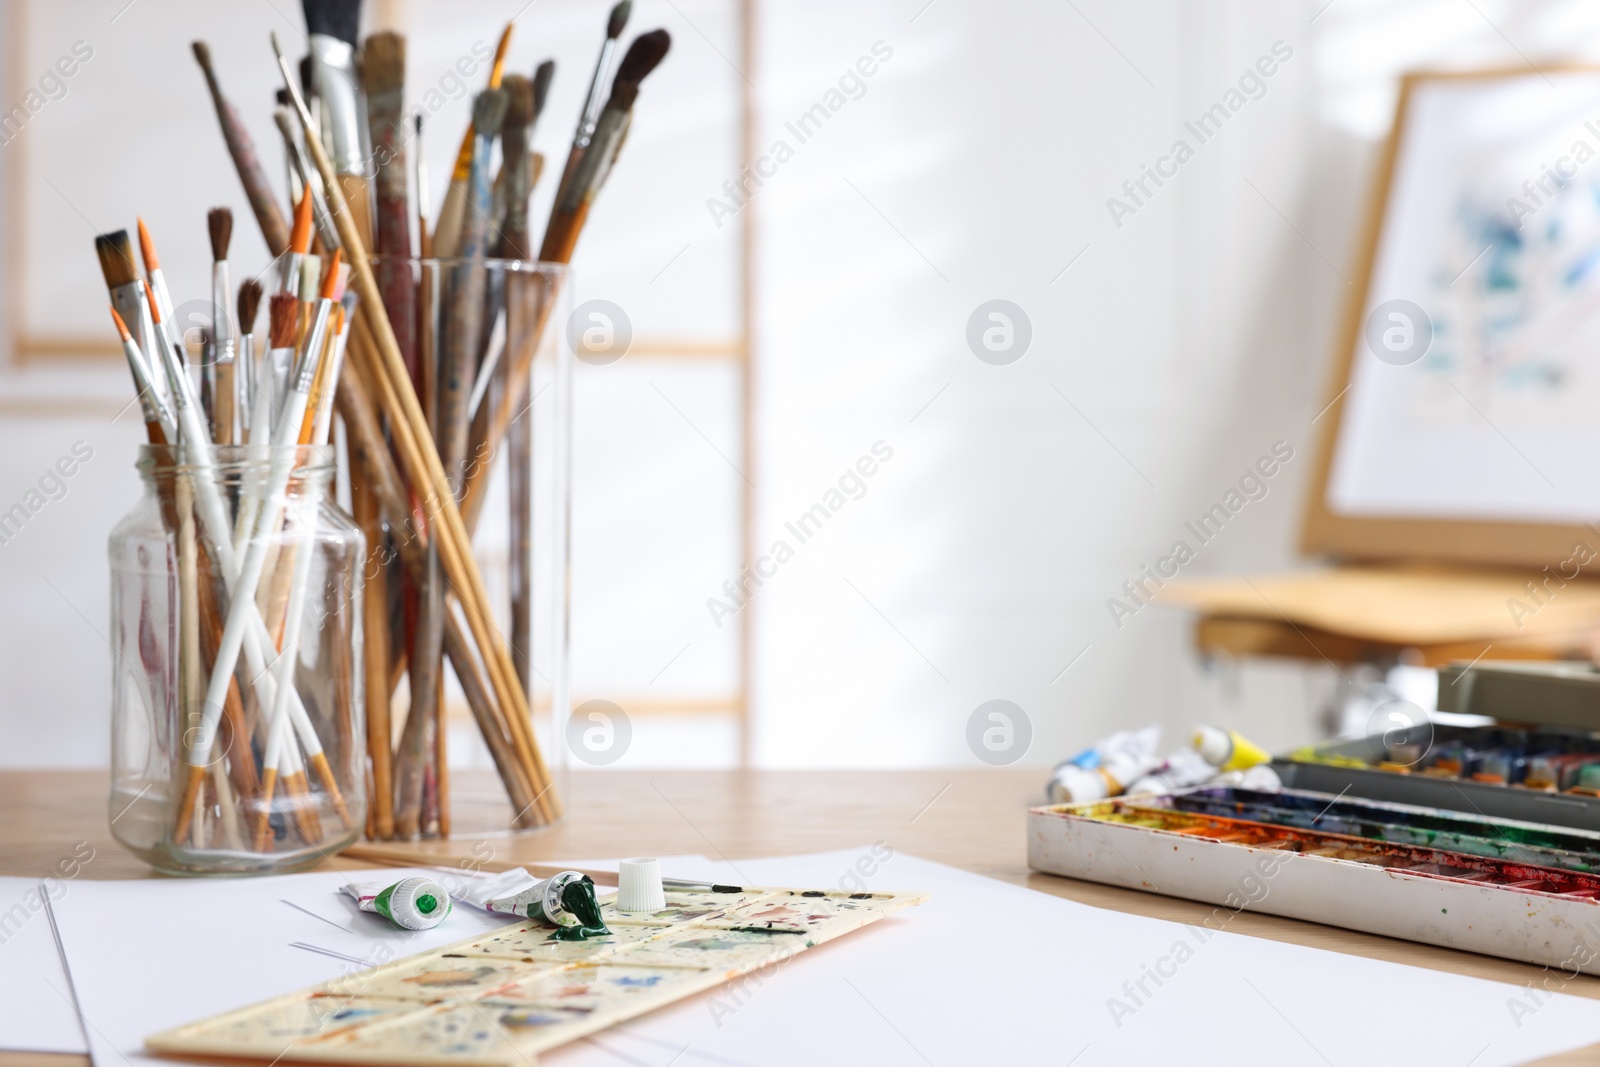 Photo of Different brushes, paints, palette and paper sheets on wooden table in studio. Space for text